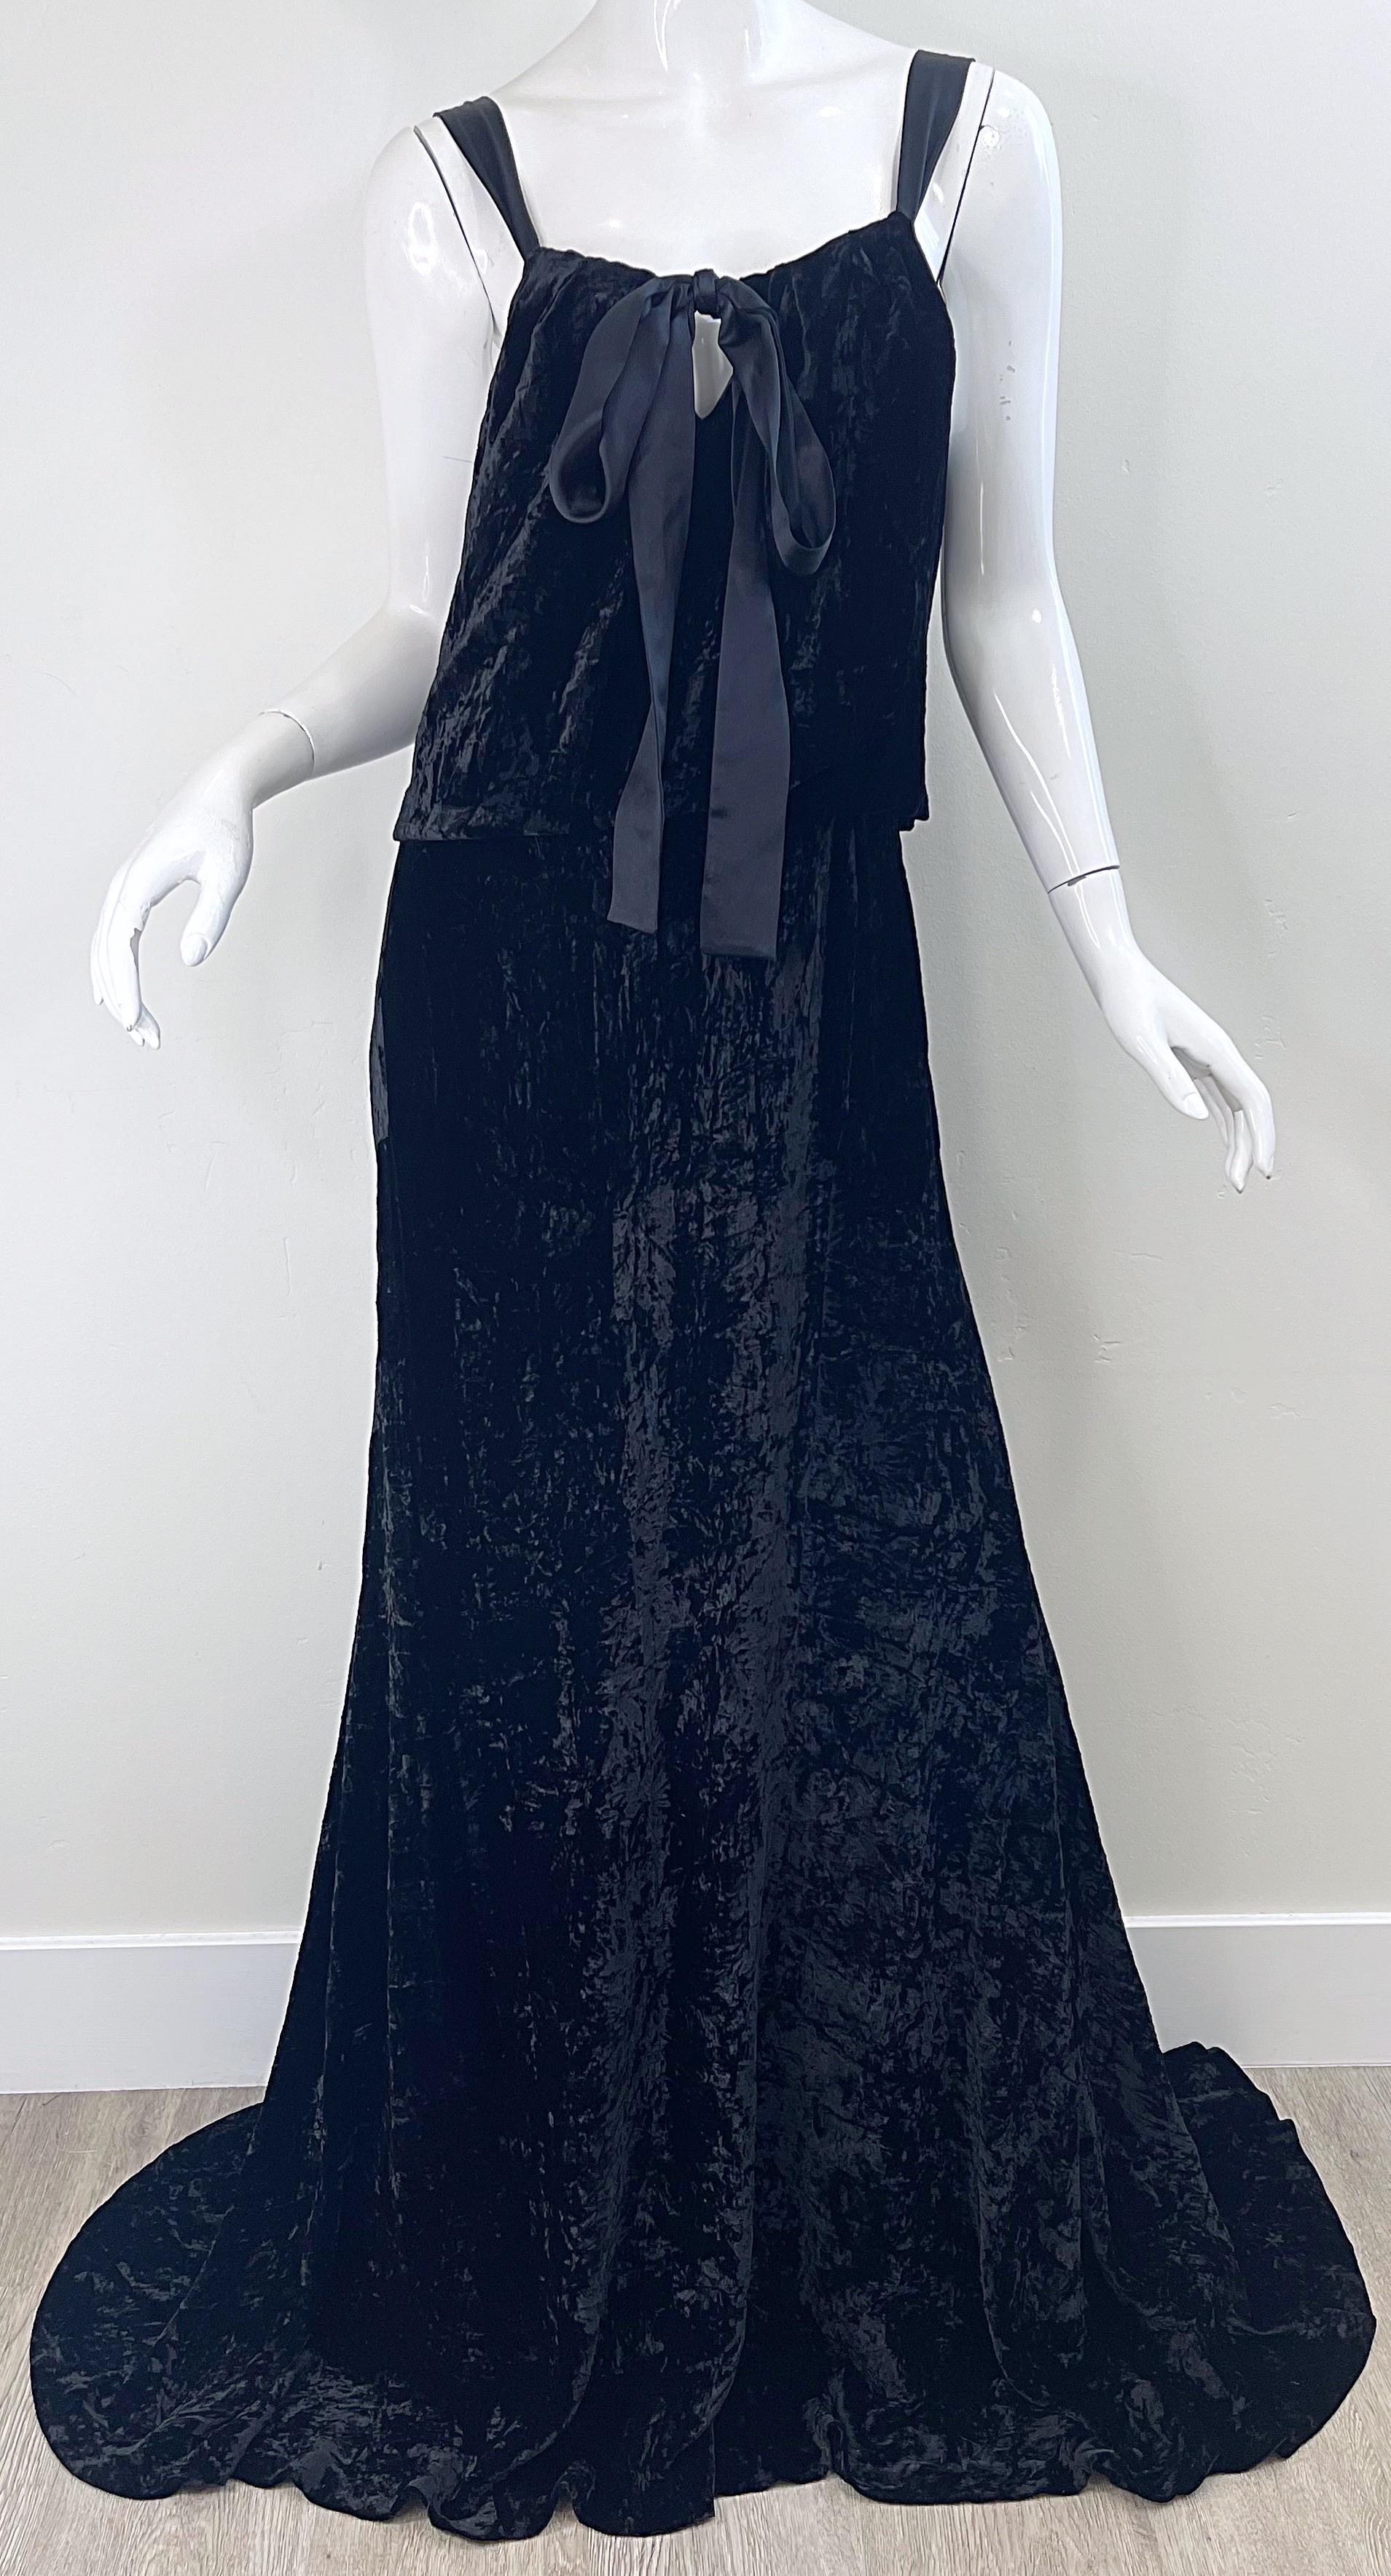 NWT Michael Kors Collection Fall 2006 Runway Size 6-8 Black Crushed Velvet Gown For Sale 7